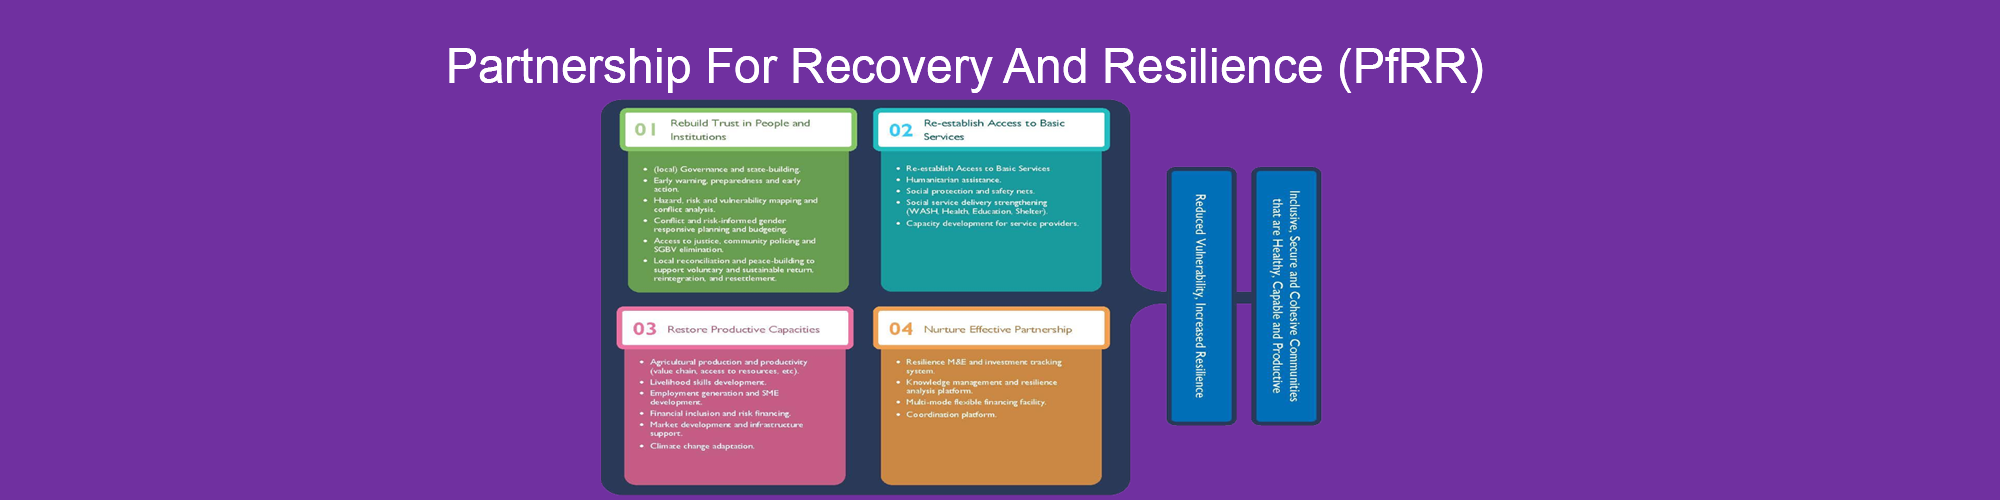 Partnership For Recovery And Resilience (PfRR)